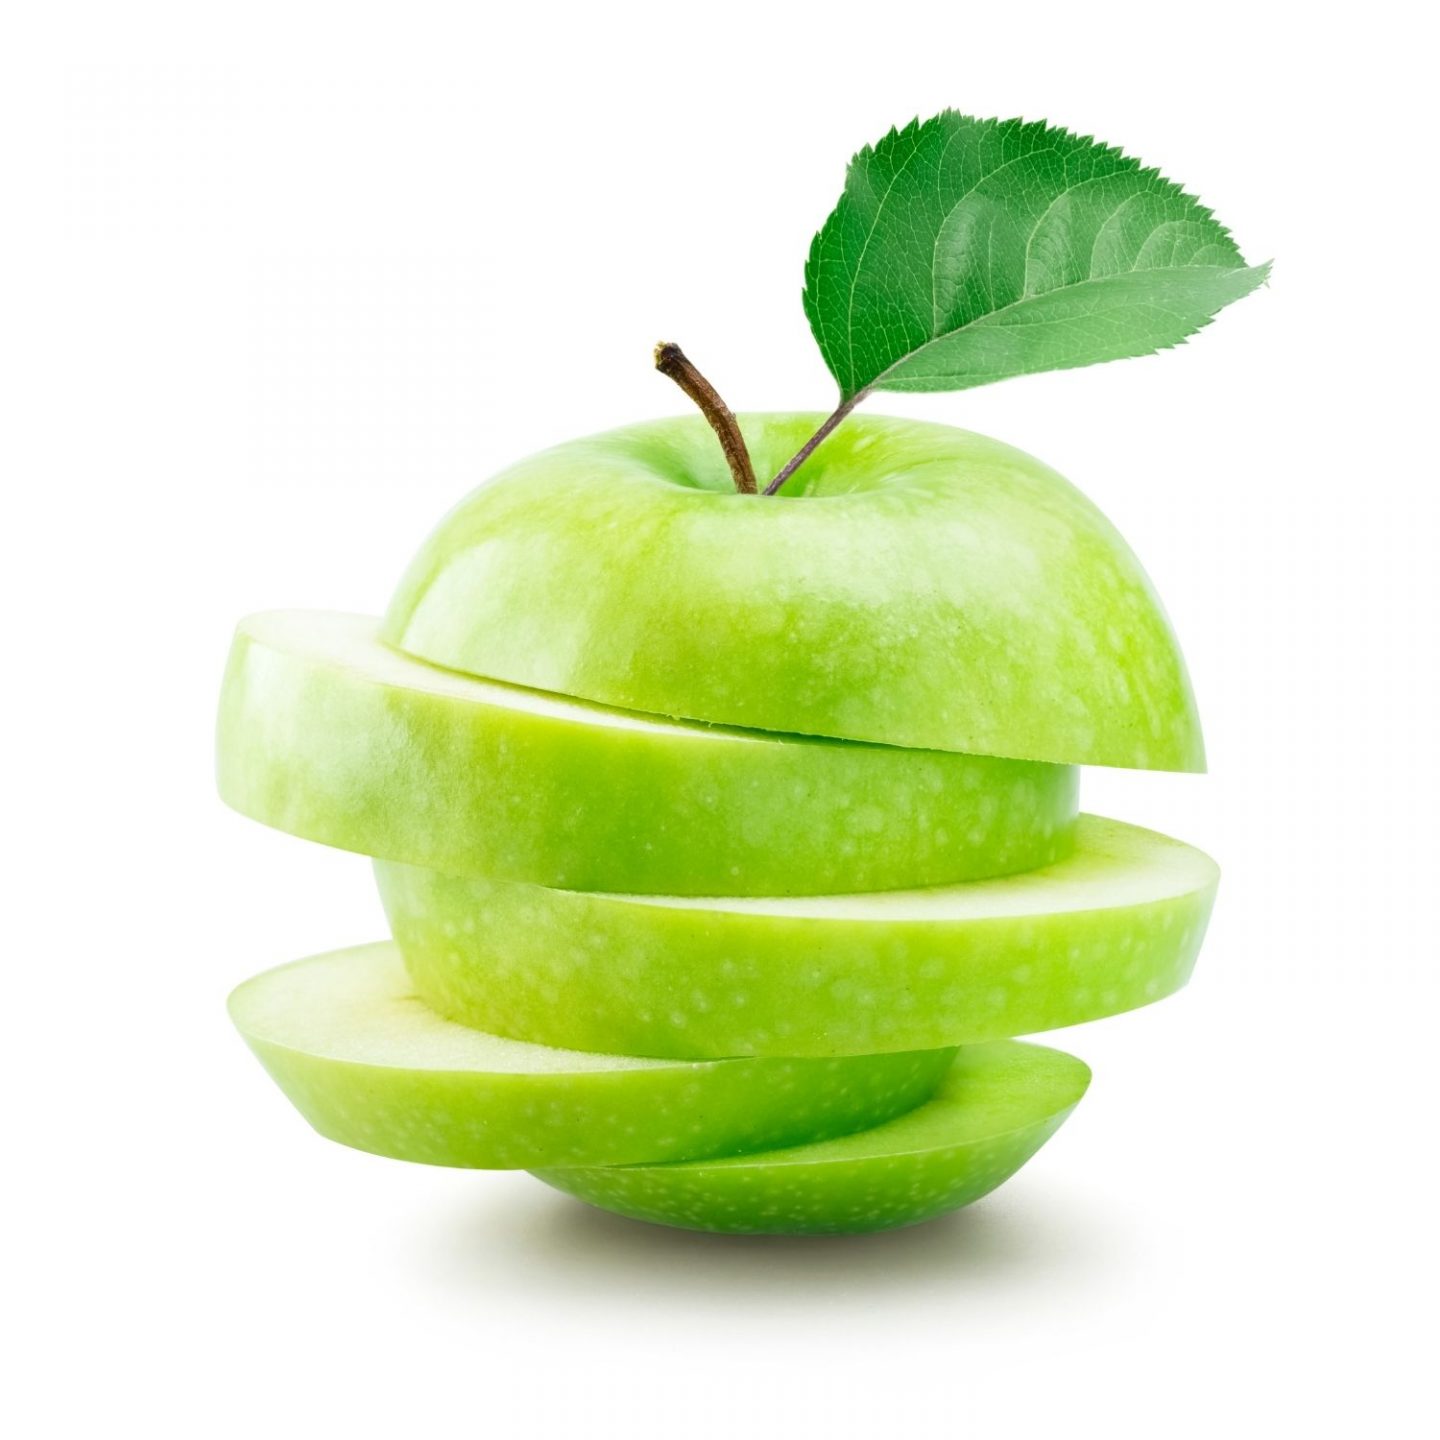 A white background with a single green apple. The apple has been cut into slices and put back together so the slices jut out to either side.